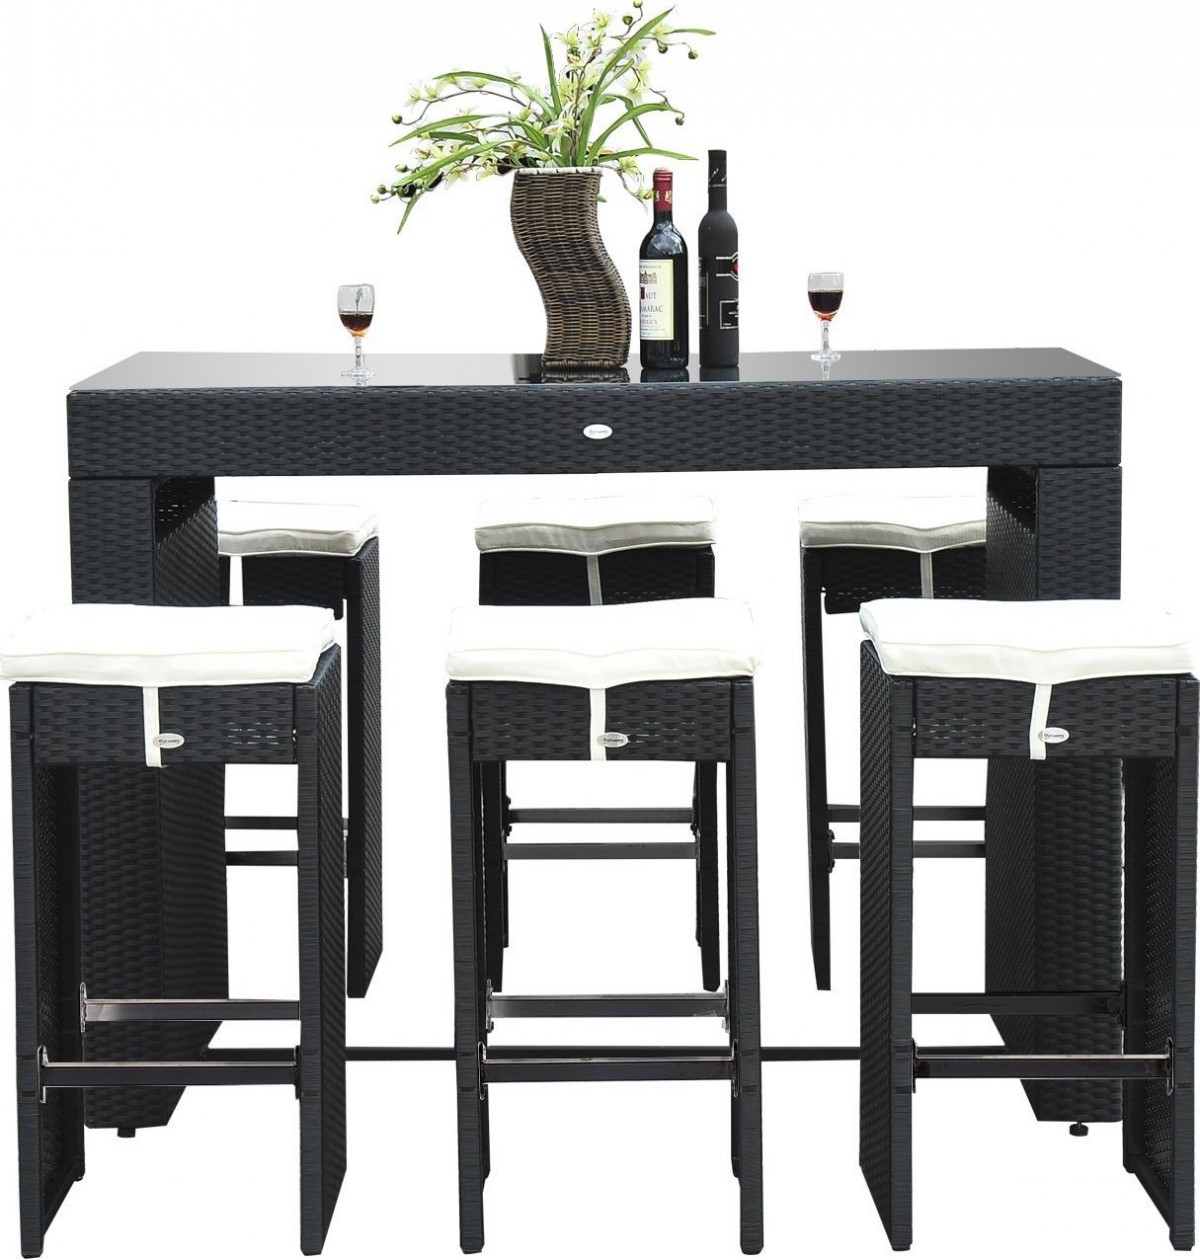 Outsunny 7-Piece Rattan Wicker Bar Stool Dining Table Set